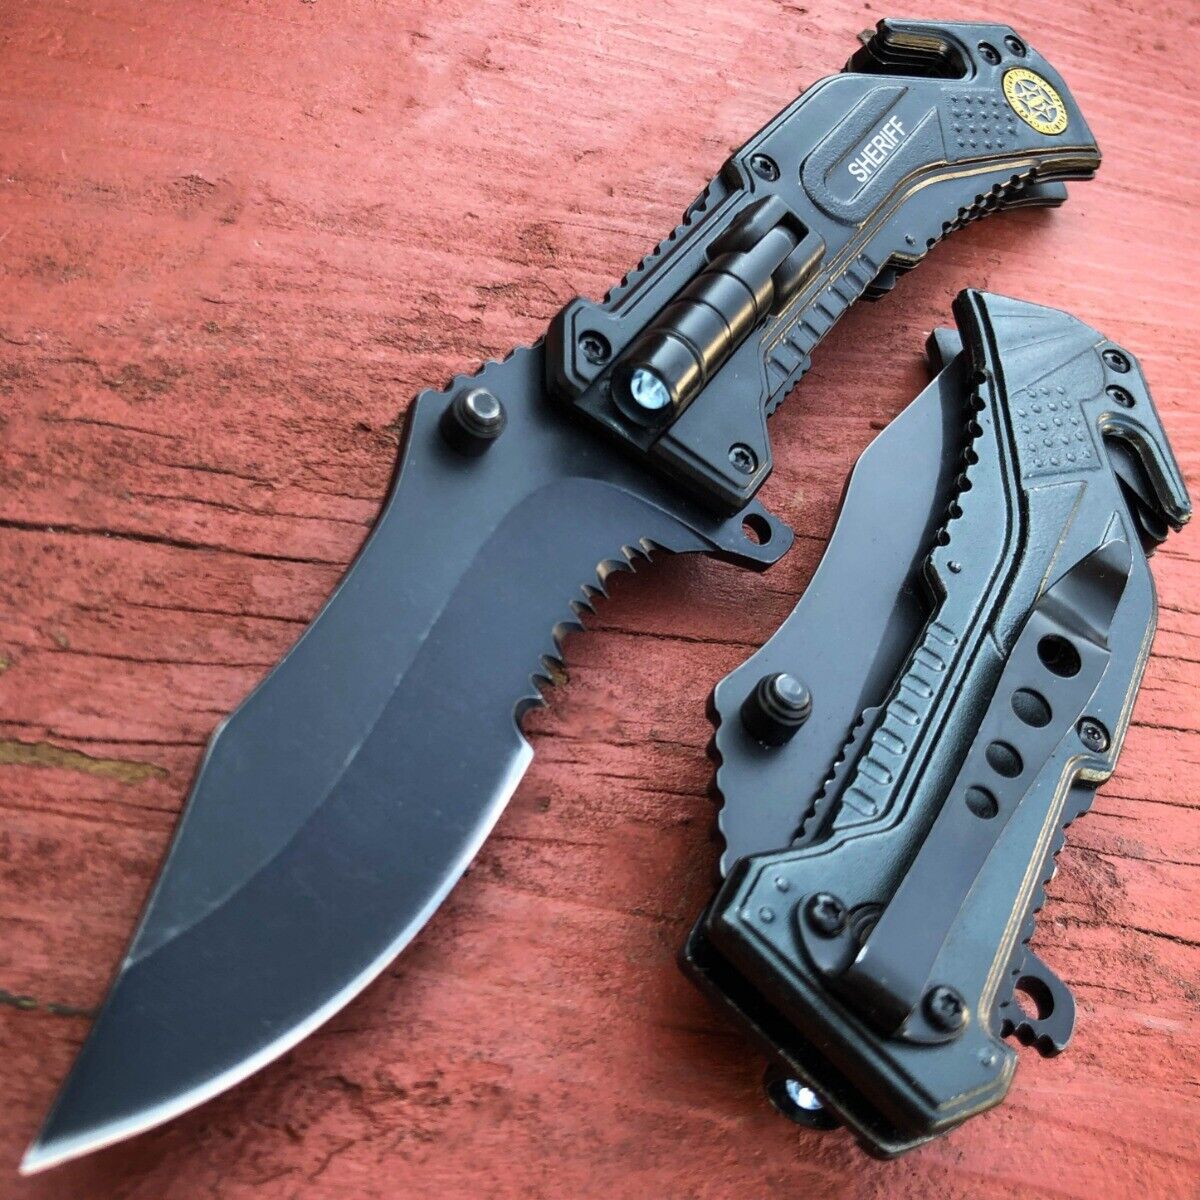 Military BLACK SHERIFF Spring Open Assisted LED Tactical Rescue Pocket Knife